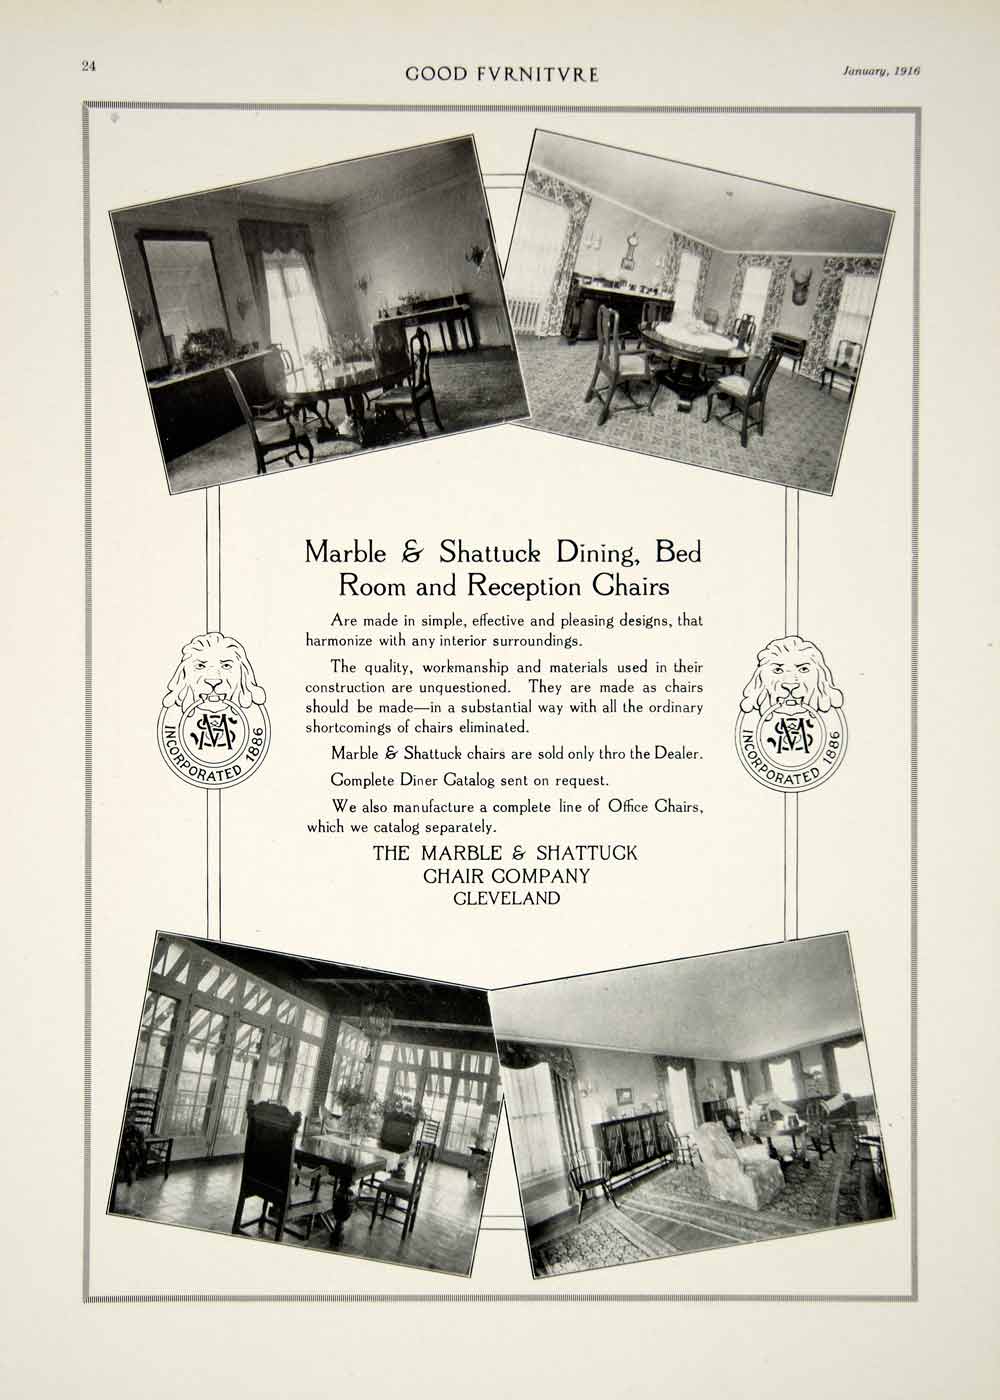 1916 Ad Vintage Marble & Shattuck Chairs Dining Room Reception Cleveland OH GF5